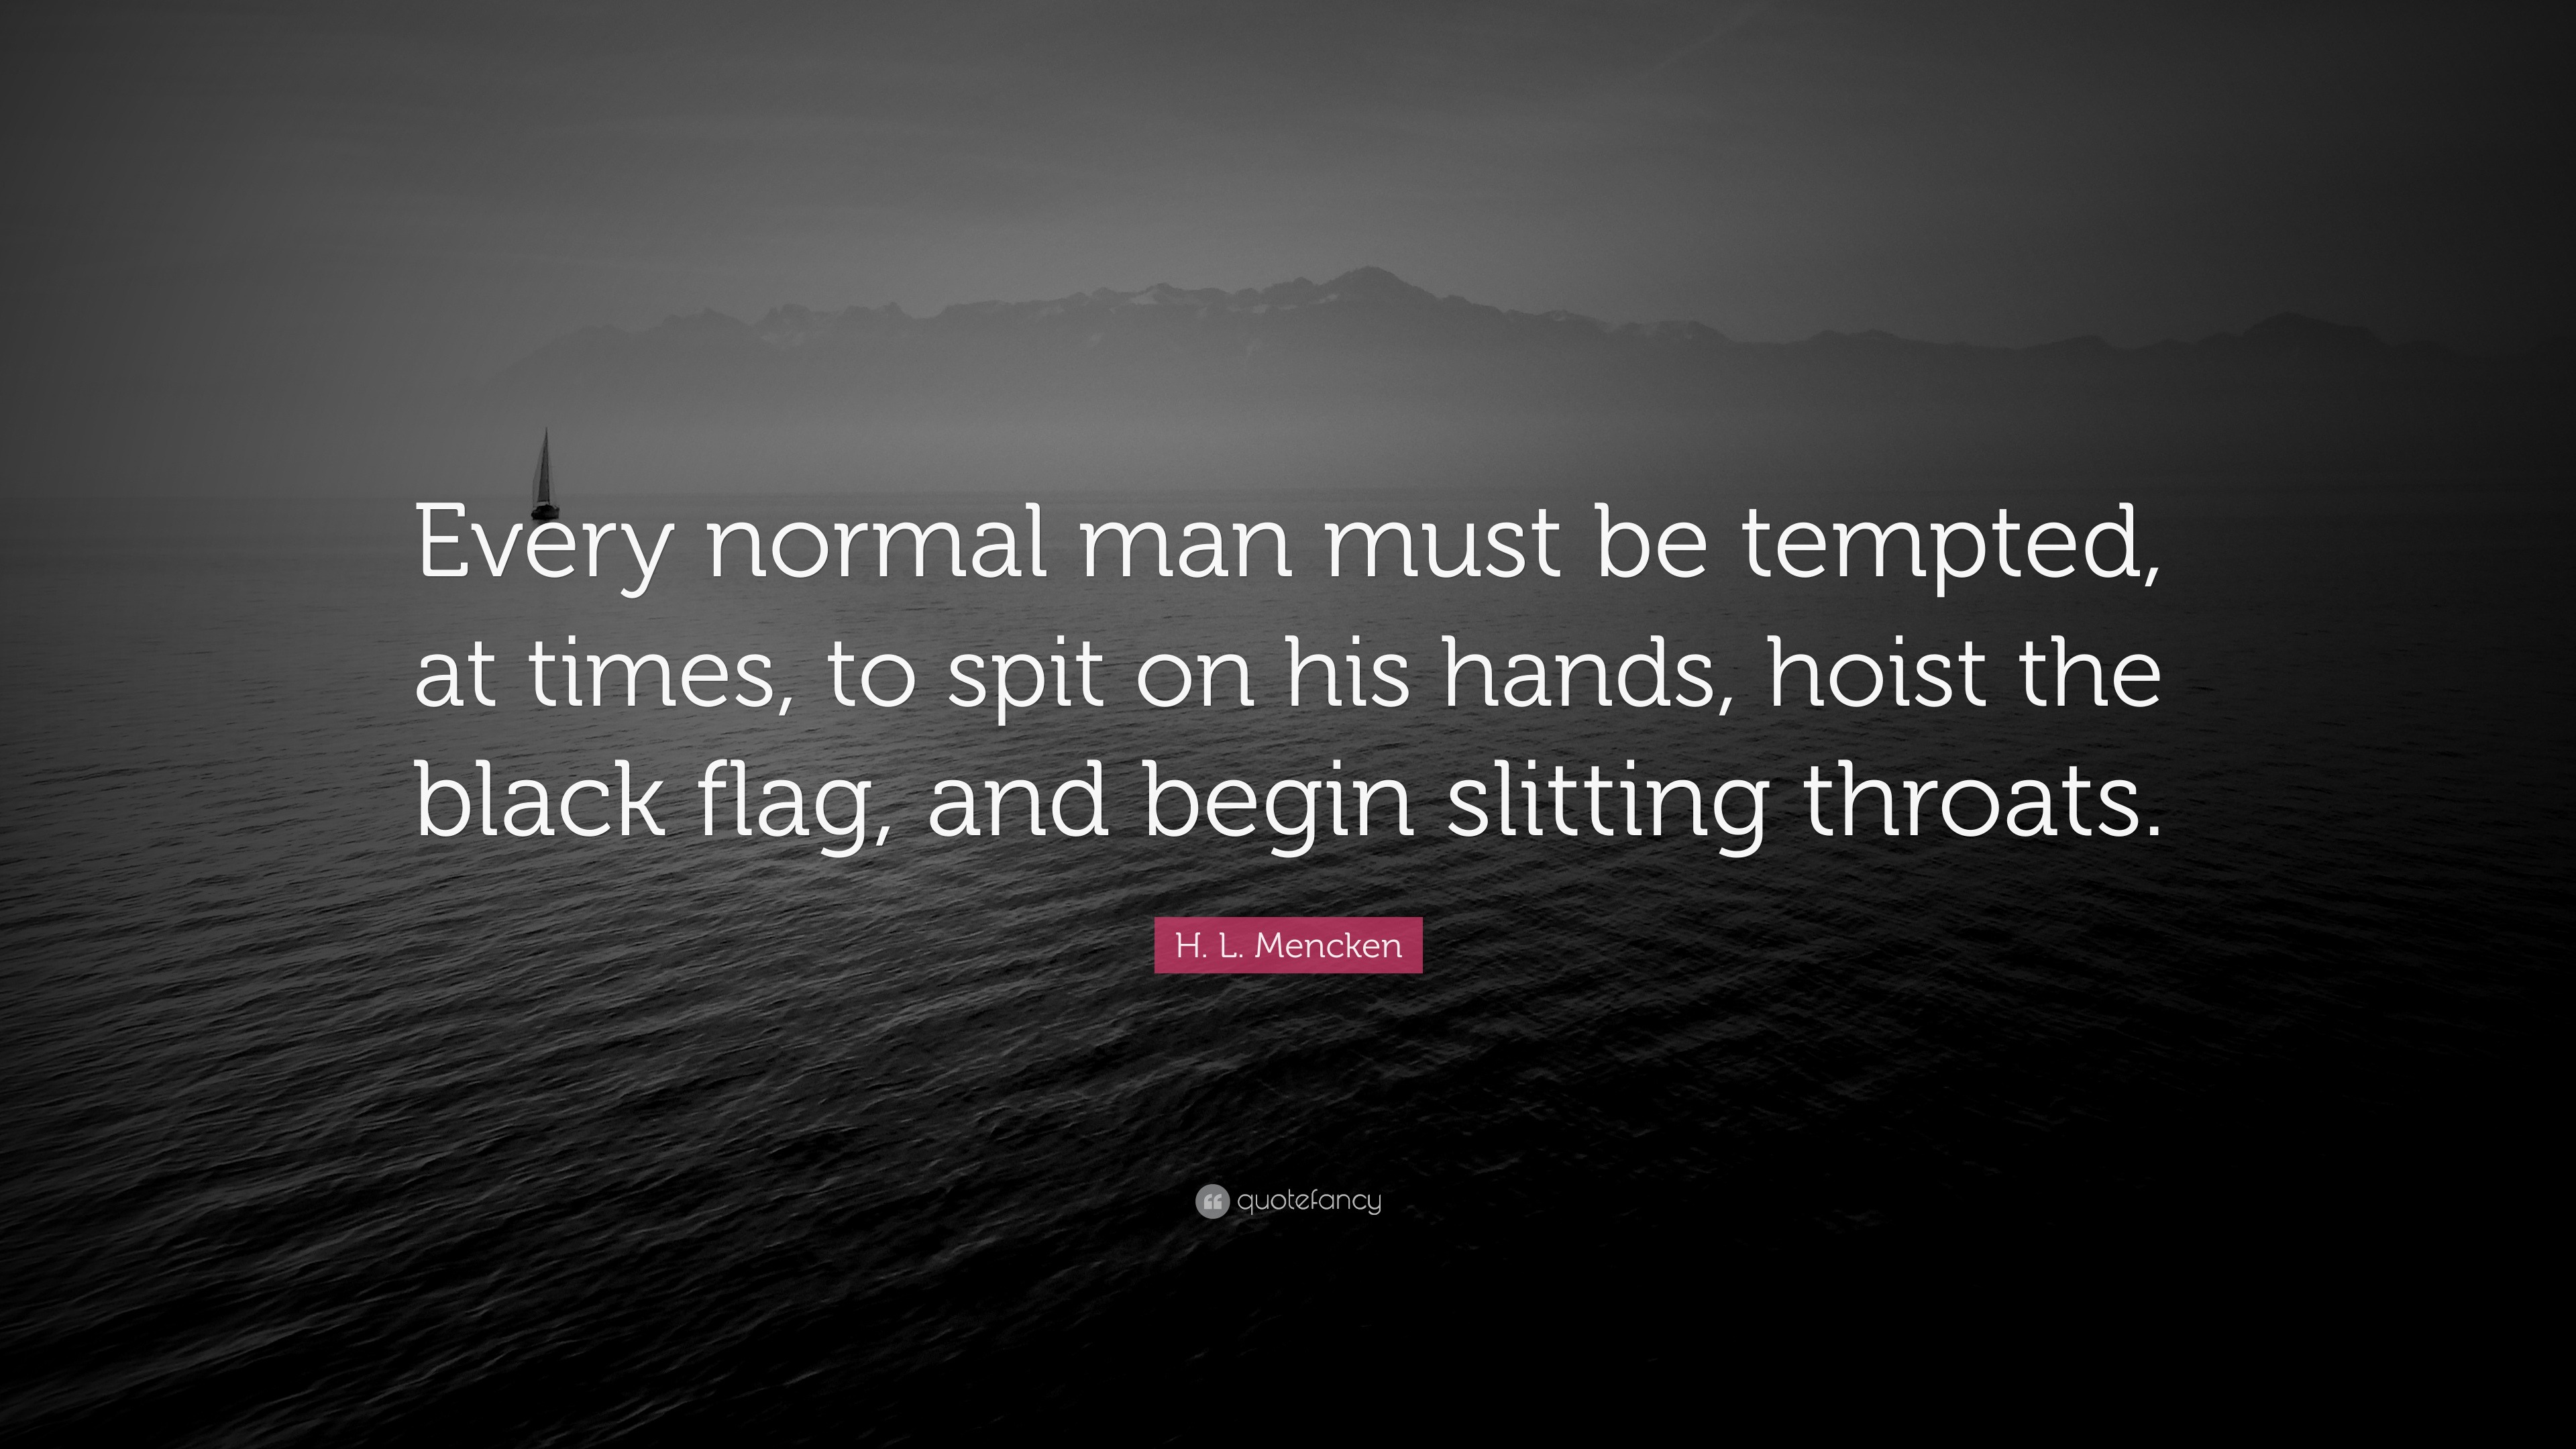 H. L. Mencken Quote: “Every normal man must be tempted, at times, to